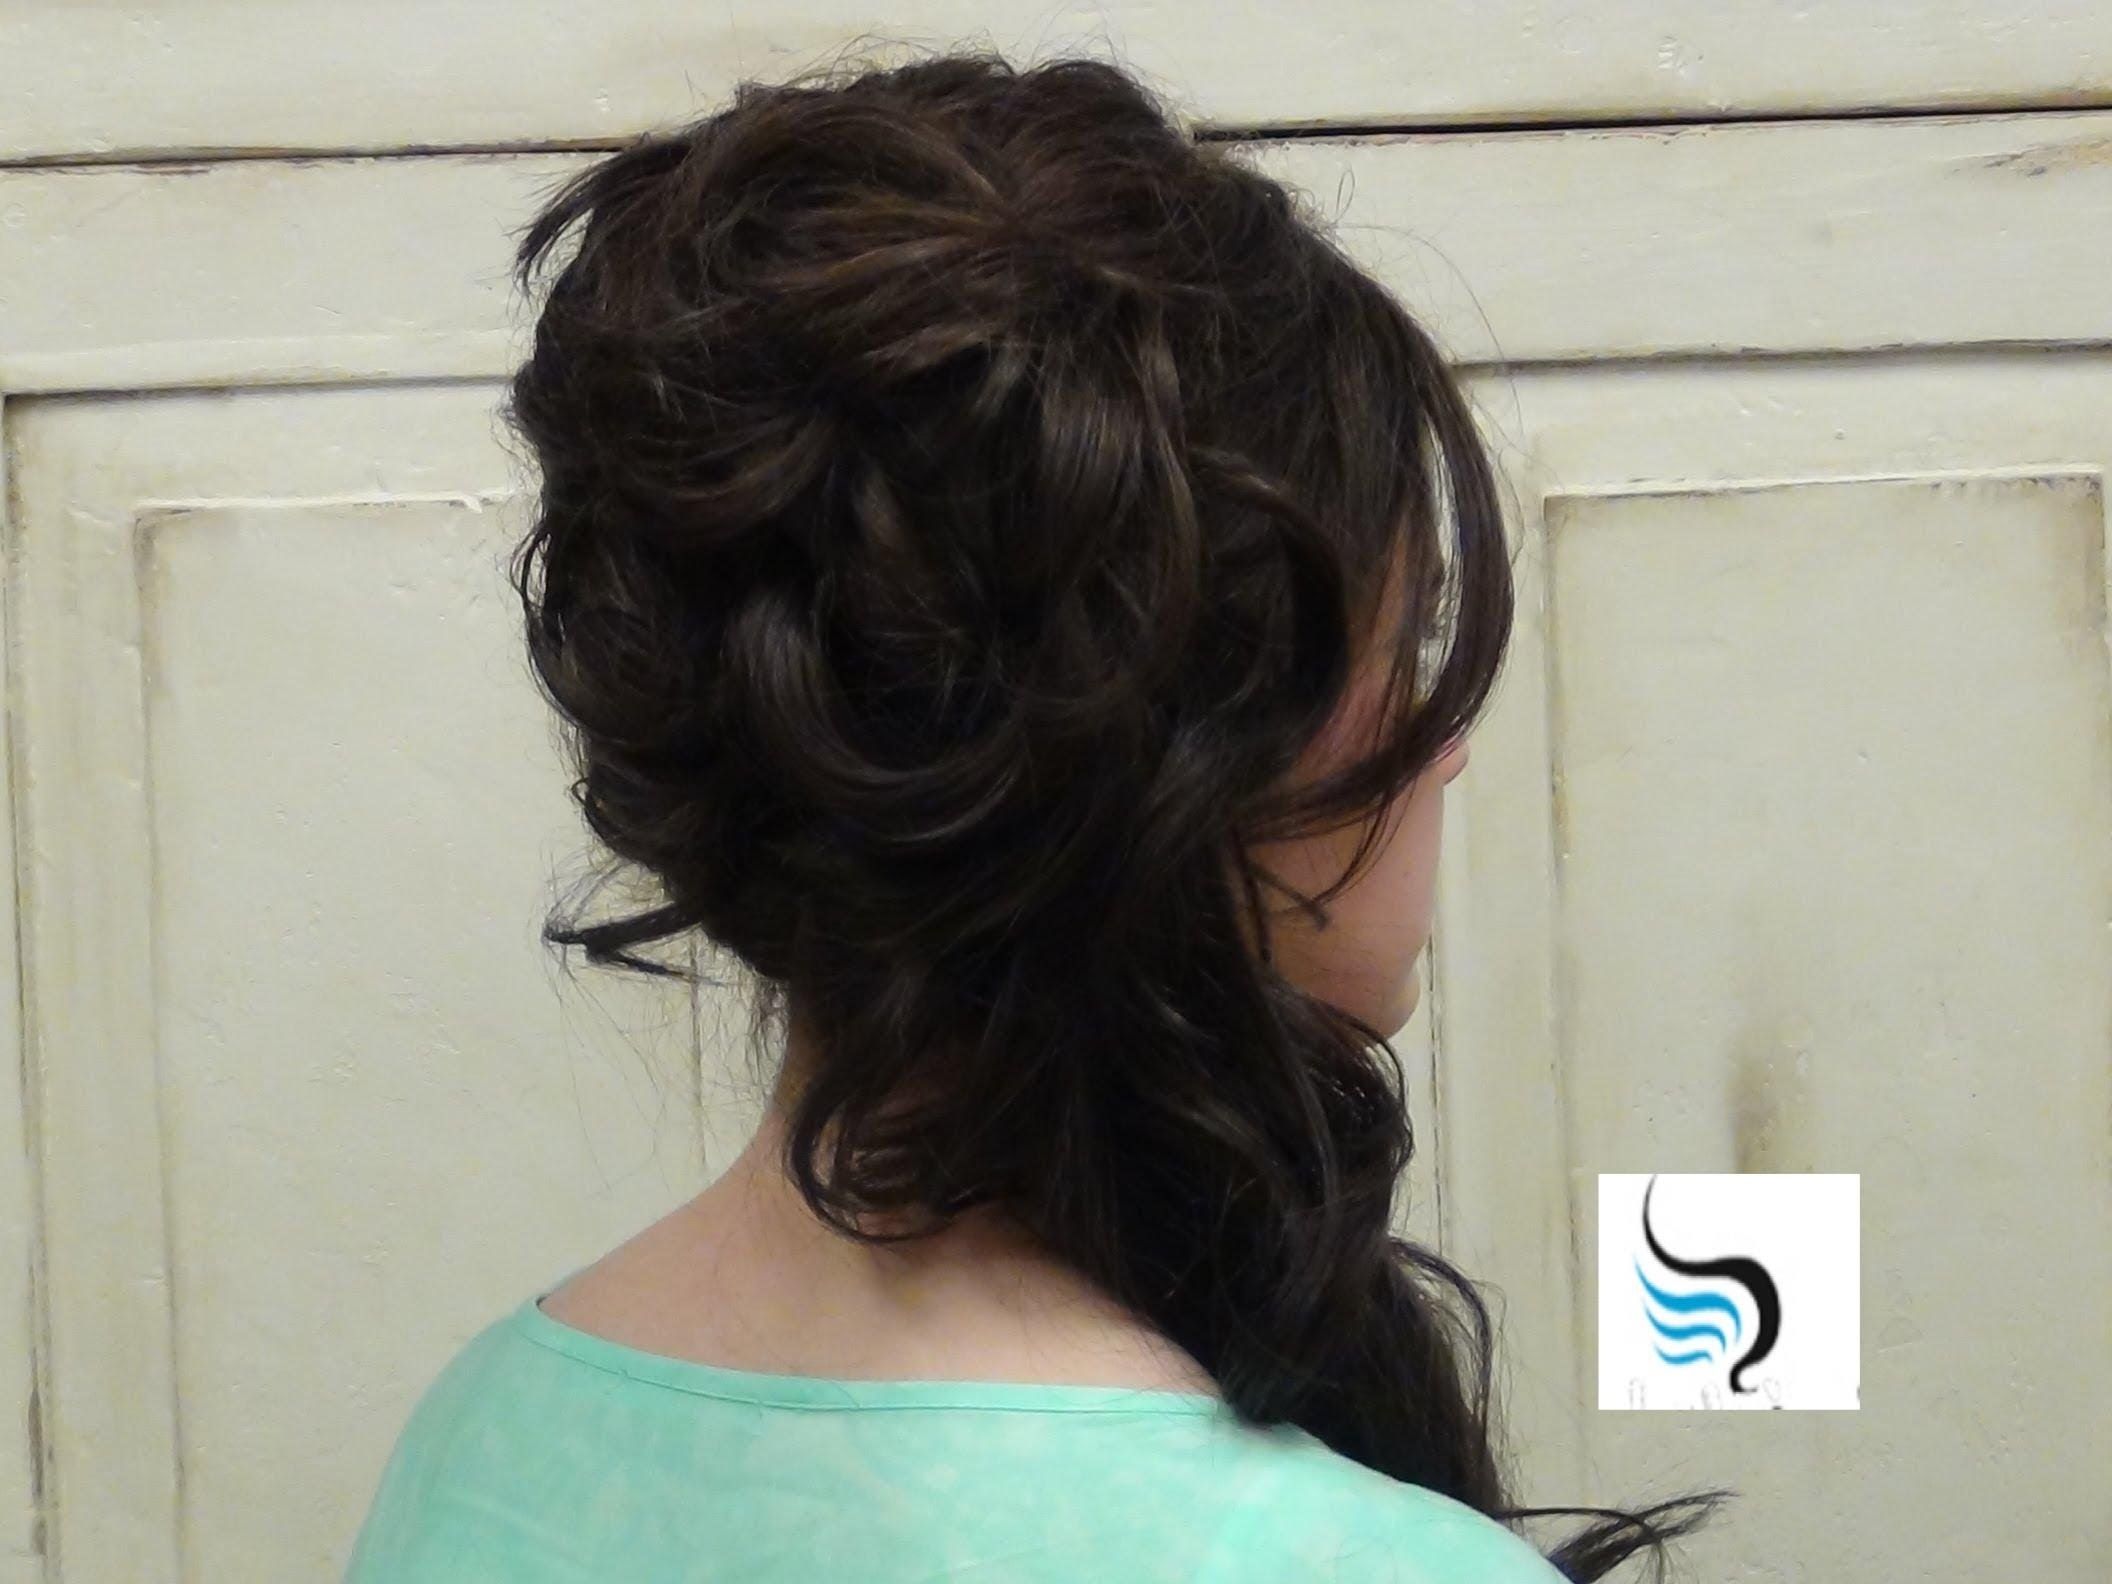 Latest Off To The Side Wedding Hairstyles In Cascading (side Updo) For Long Hair Prom Or Weddings Hairstyles (View 1 of 15)